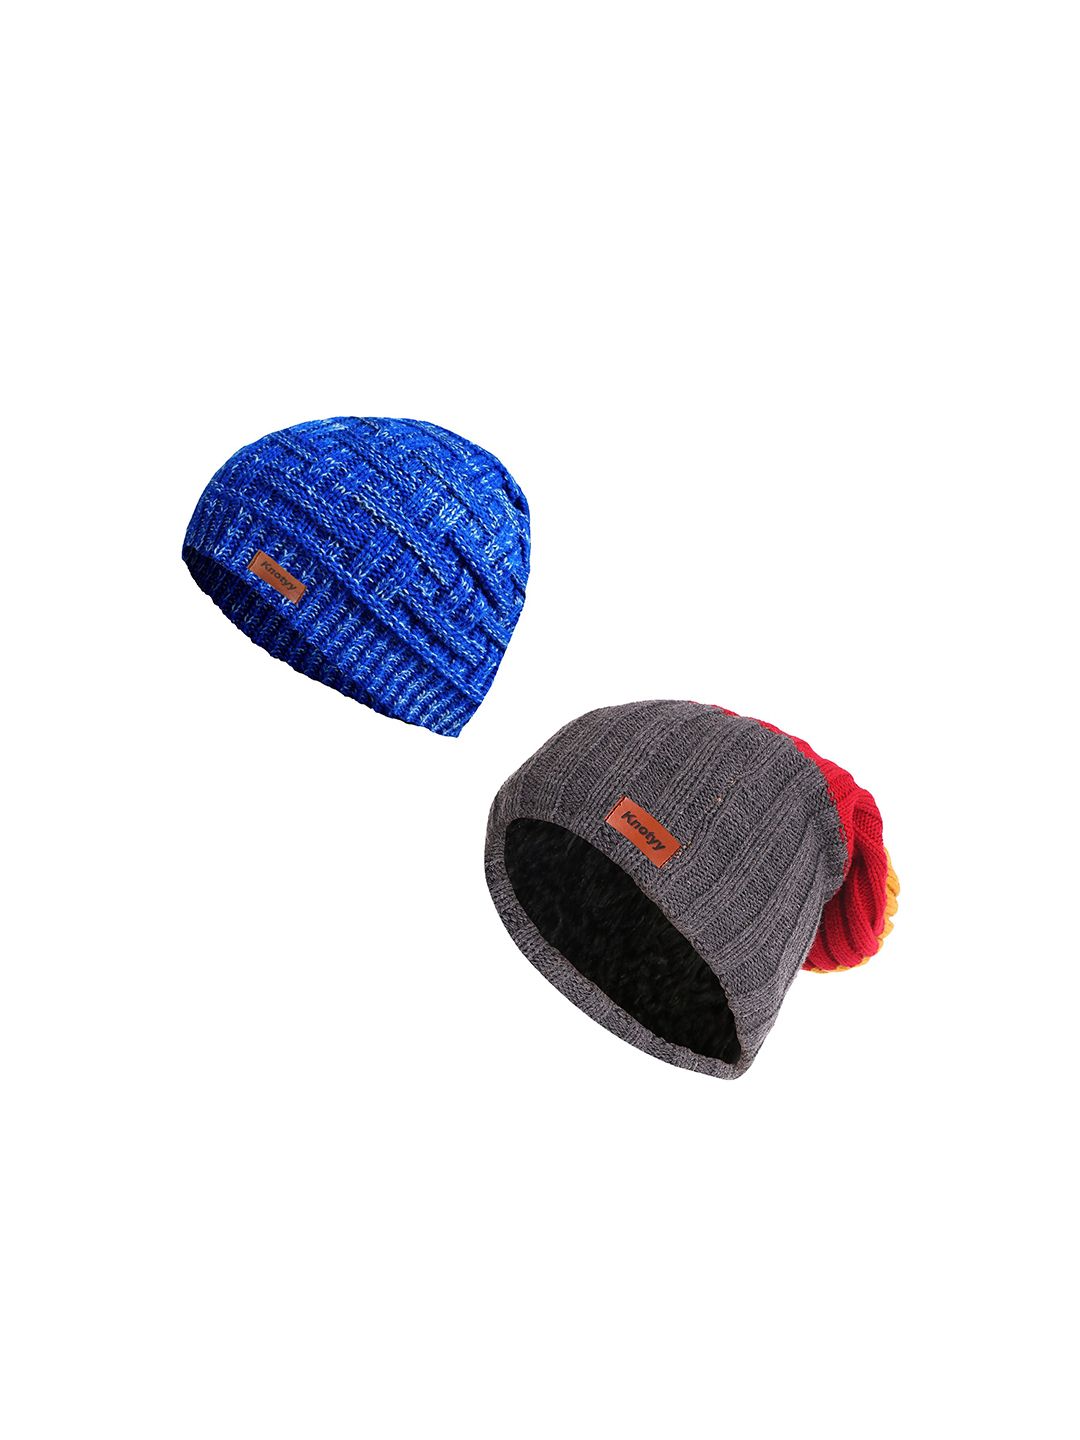 Knotyy Unisex Pack Of 2 Self Design Acrylic Beanies Price in India